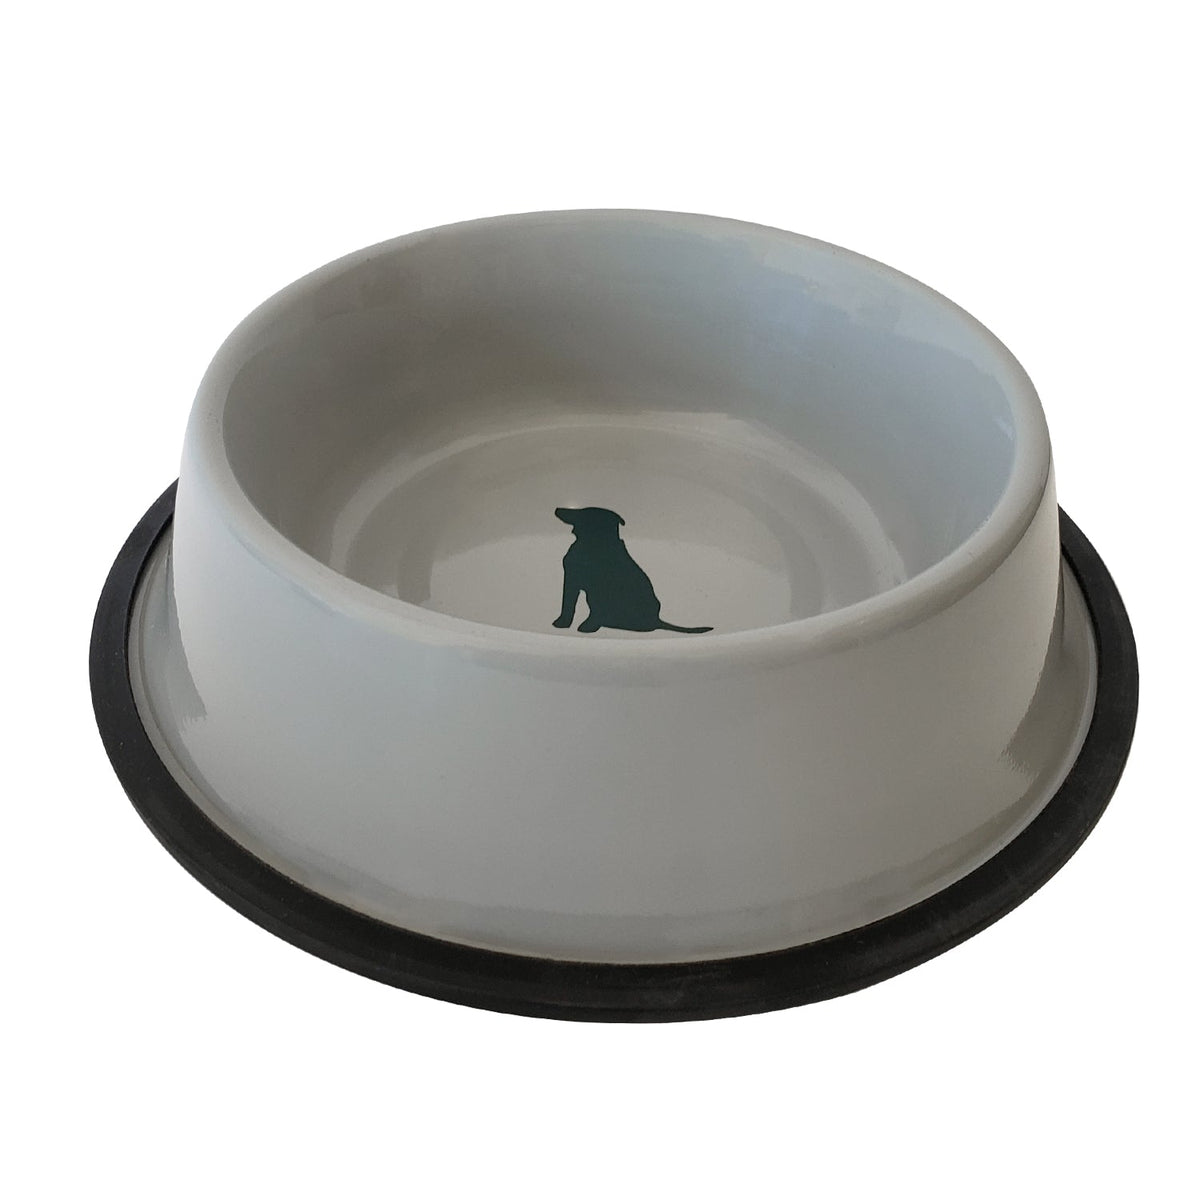 Non Skid Cool Gray Bowl with Teal Dog Design